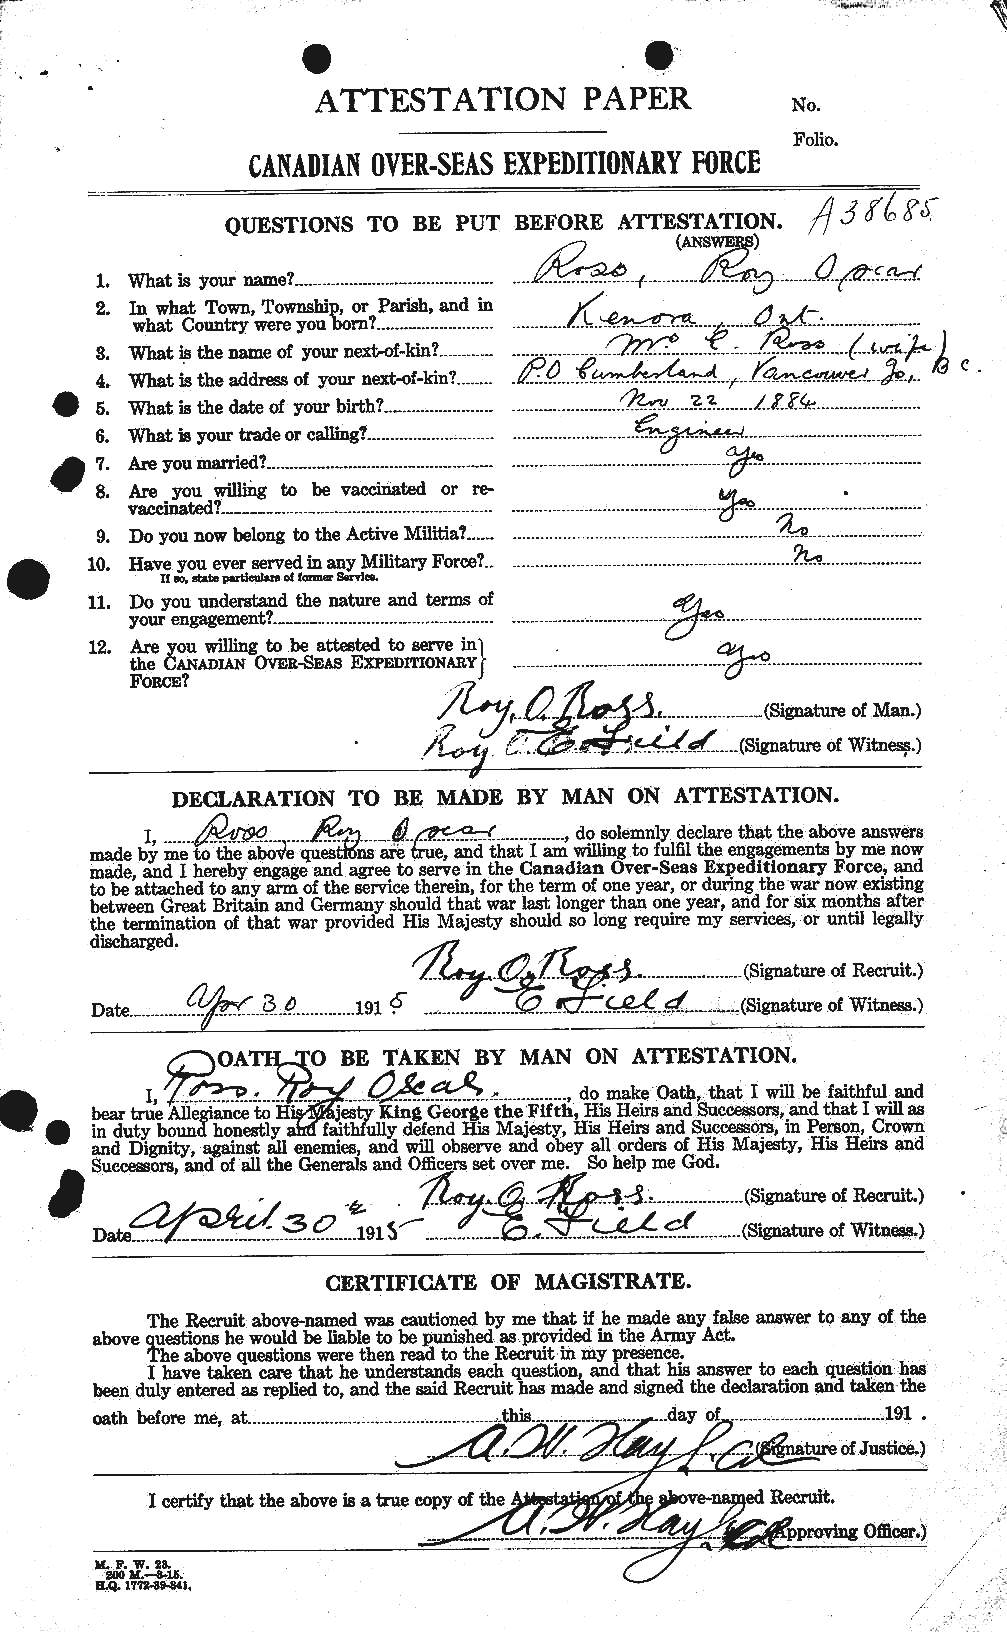 Personnel Records of the First World War - CEF 614009a